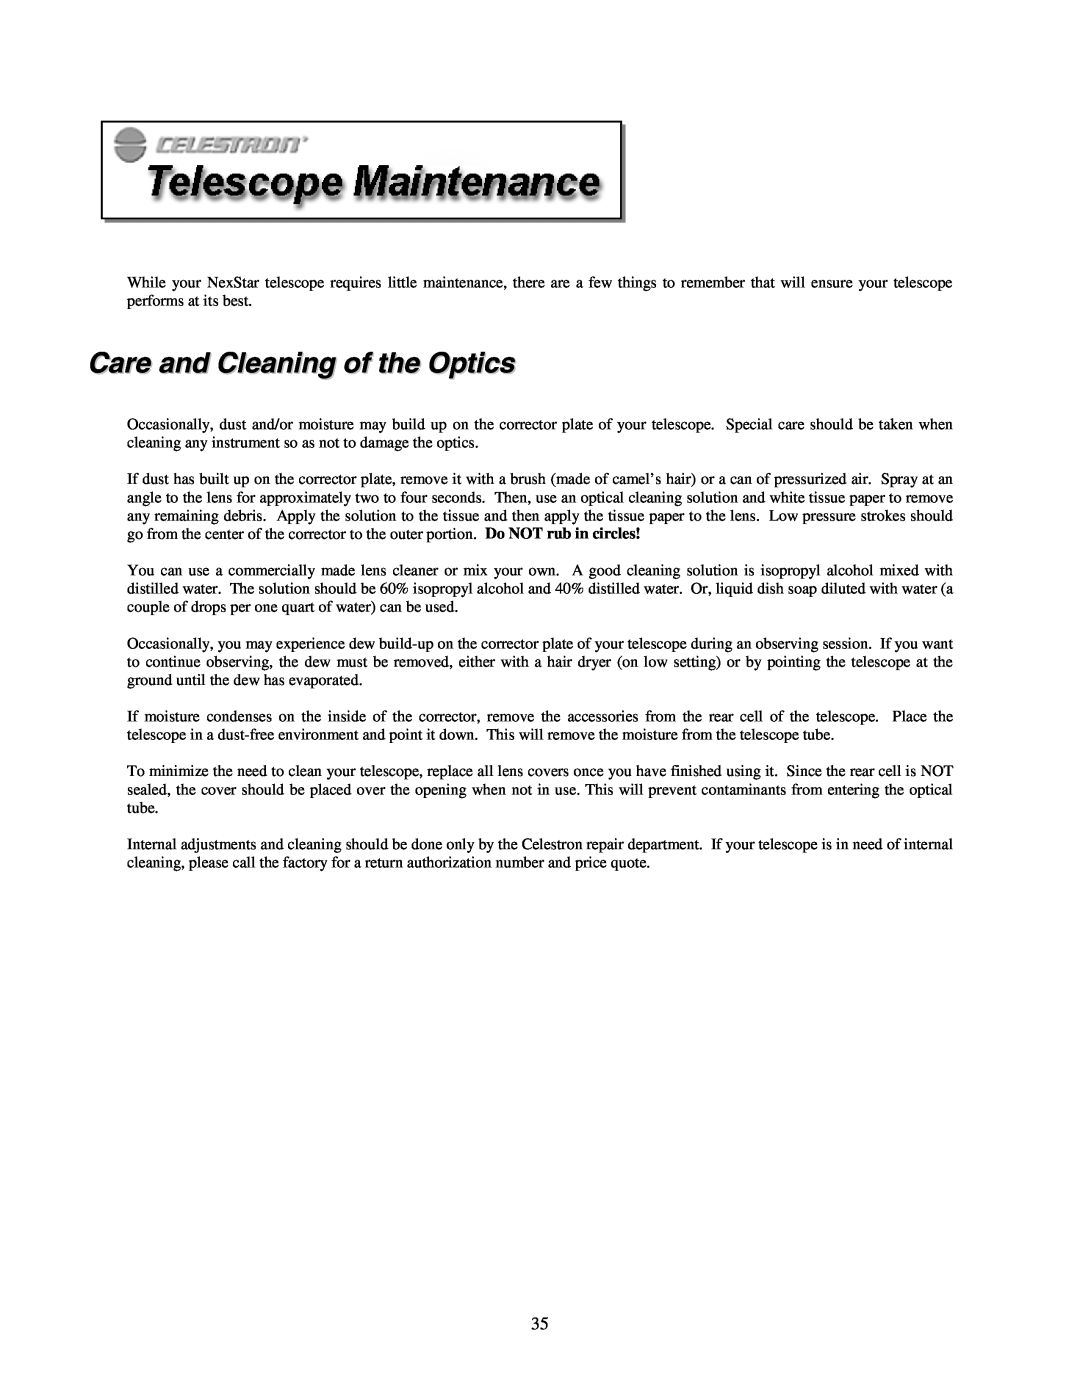 Celestron NexStar HC manual Care and Cleaning of the Optics 